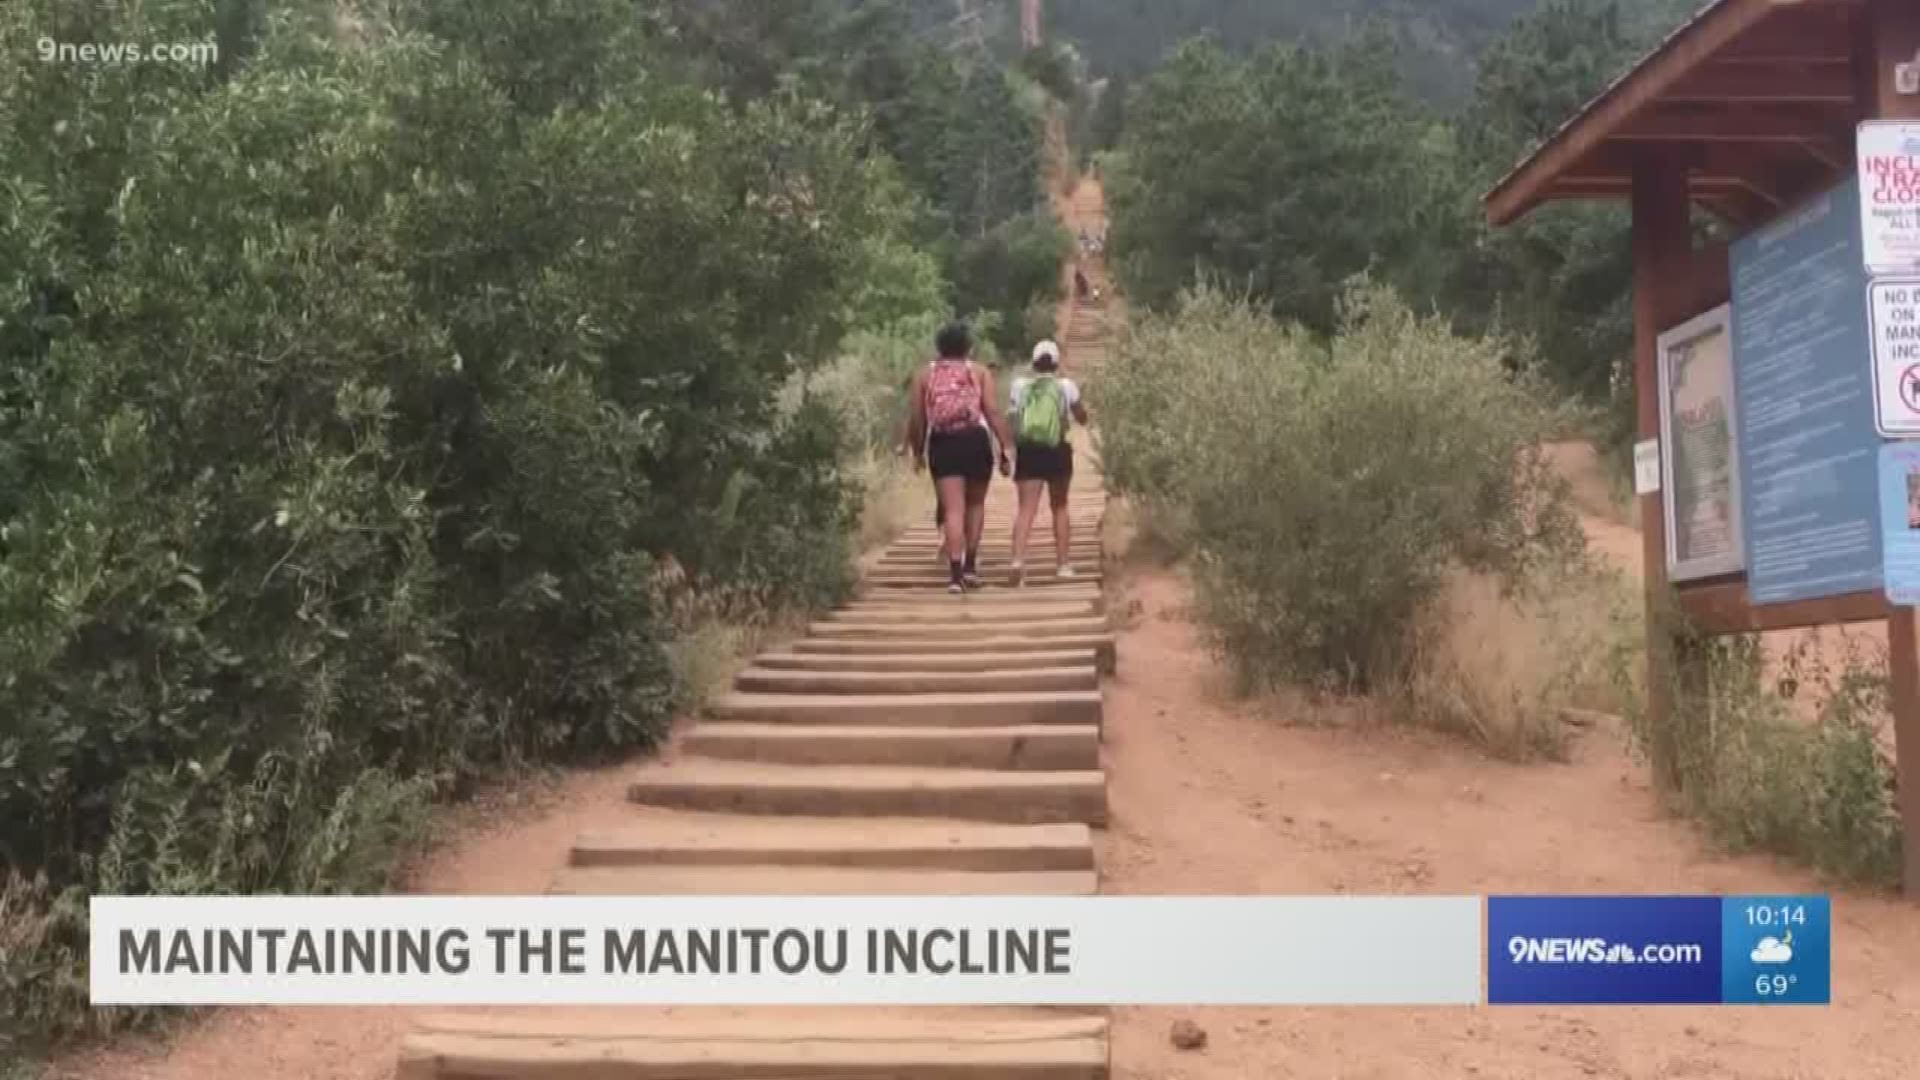 Since the Manitou Incline opened, maintenance crews have spent millions of dollars on trail upkeep and repairs.